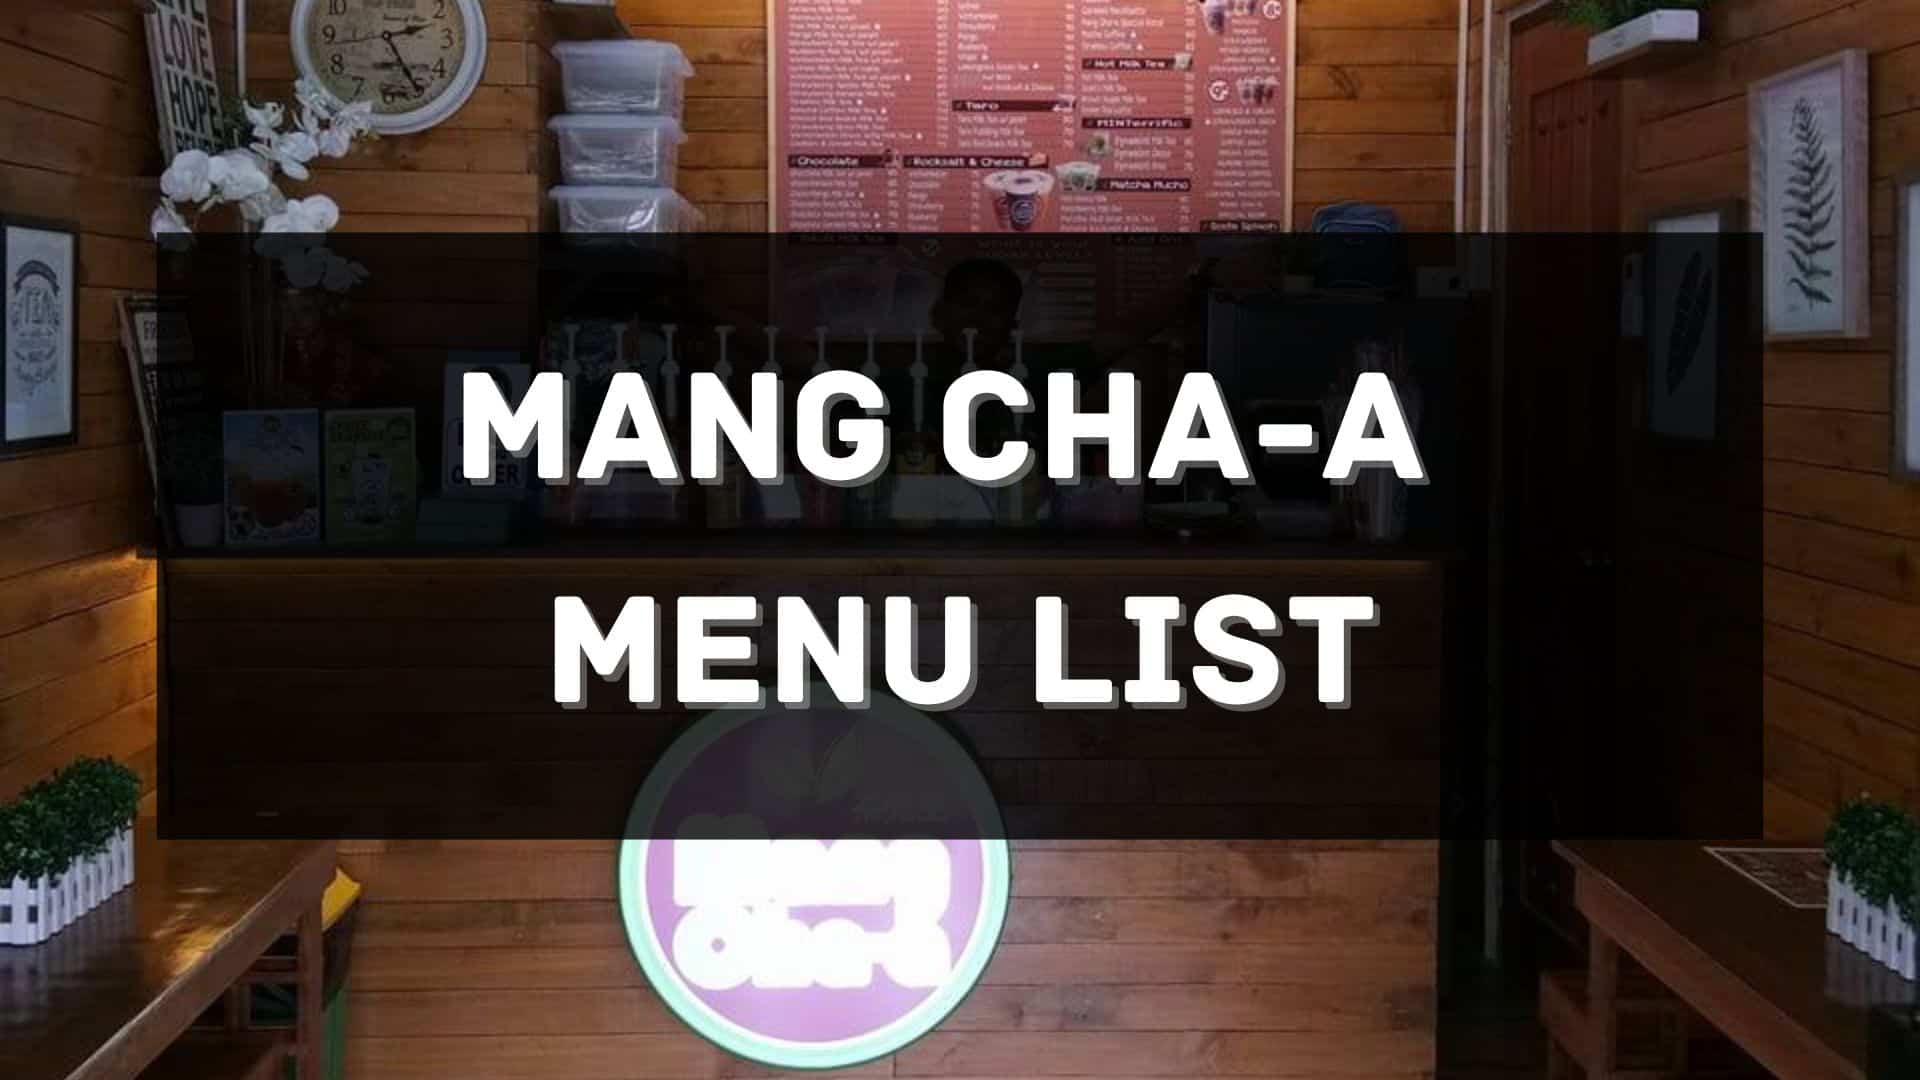 mang cha-a menu prices philippines